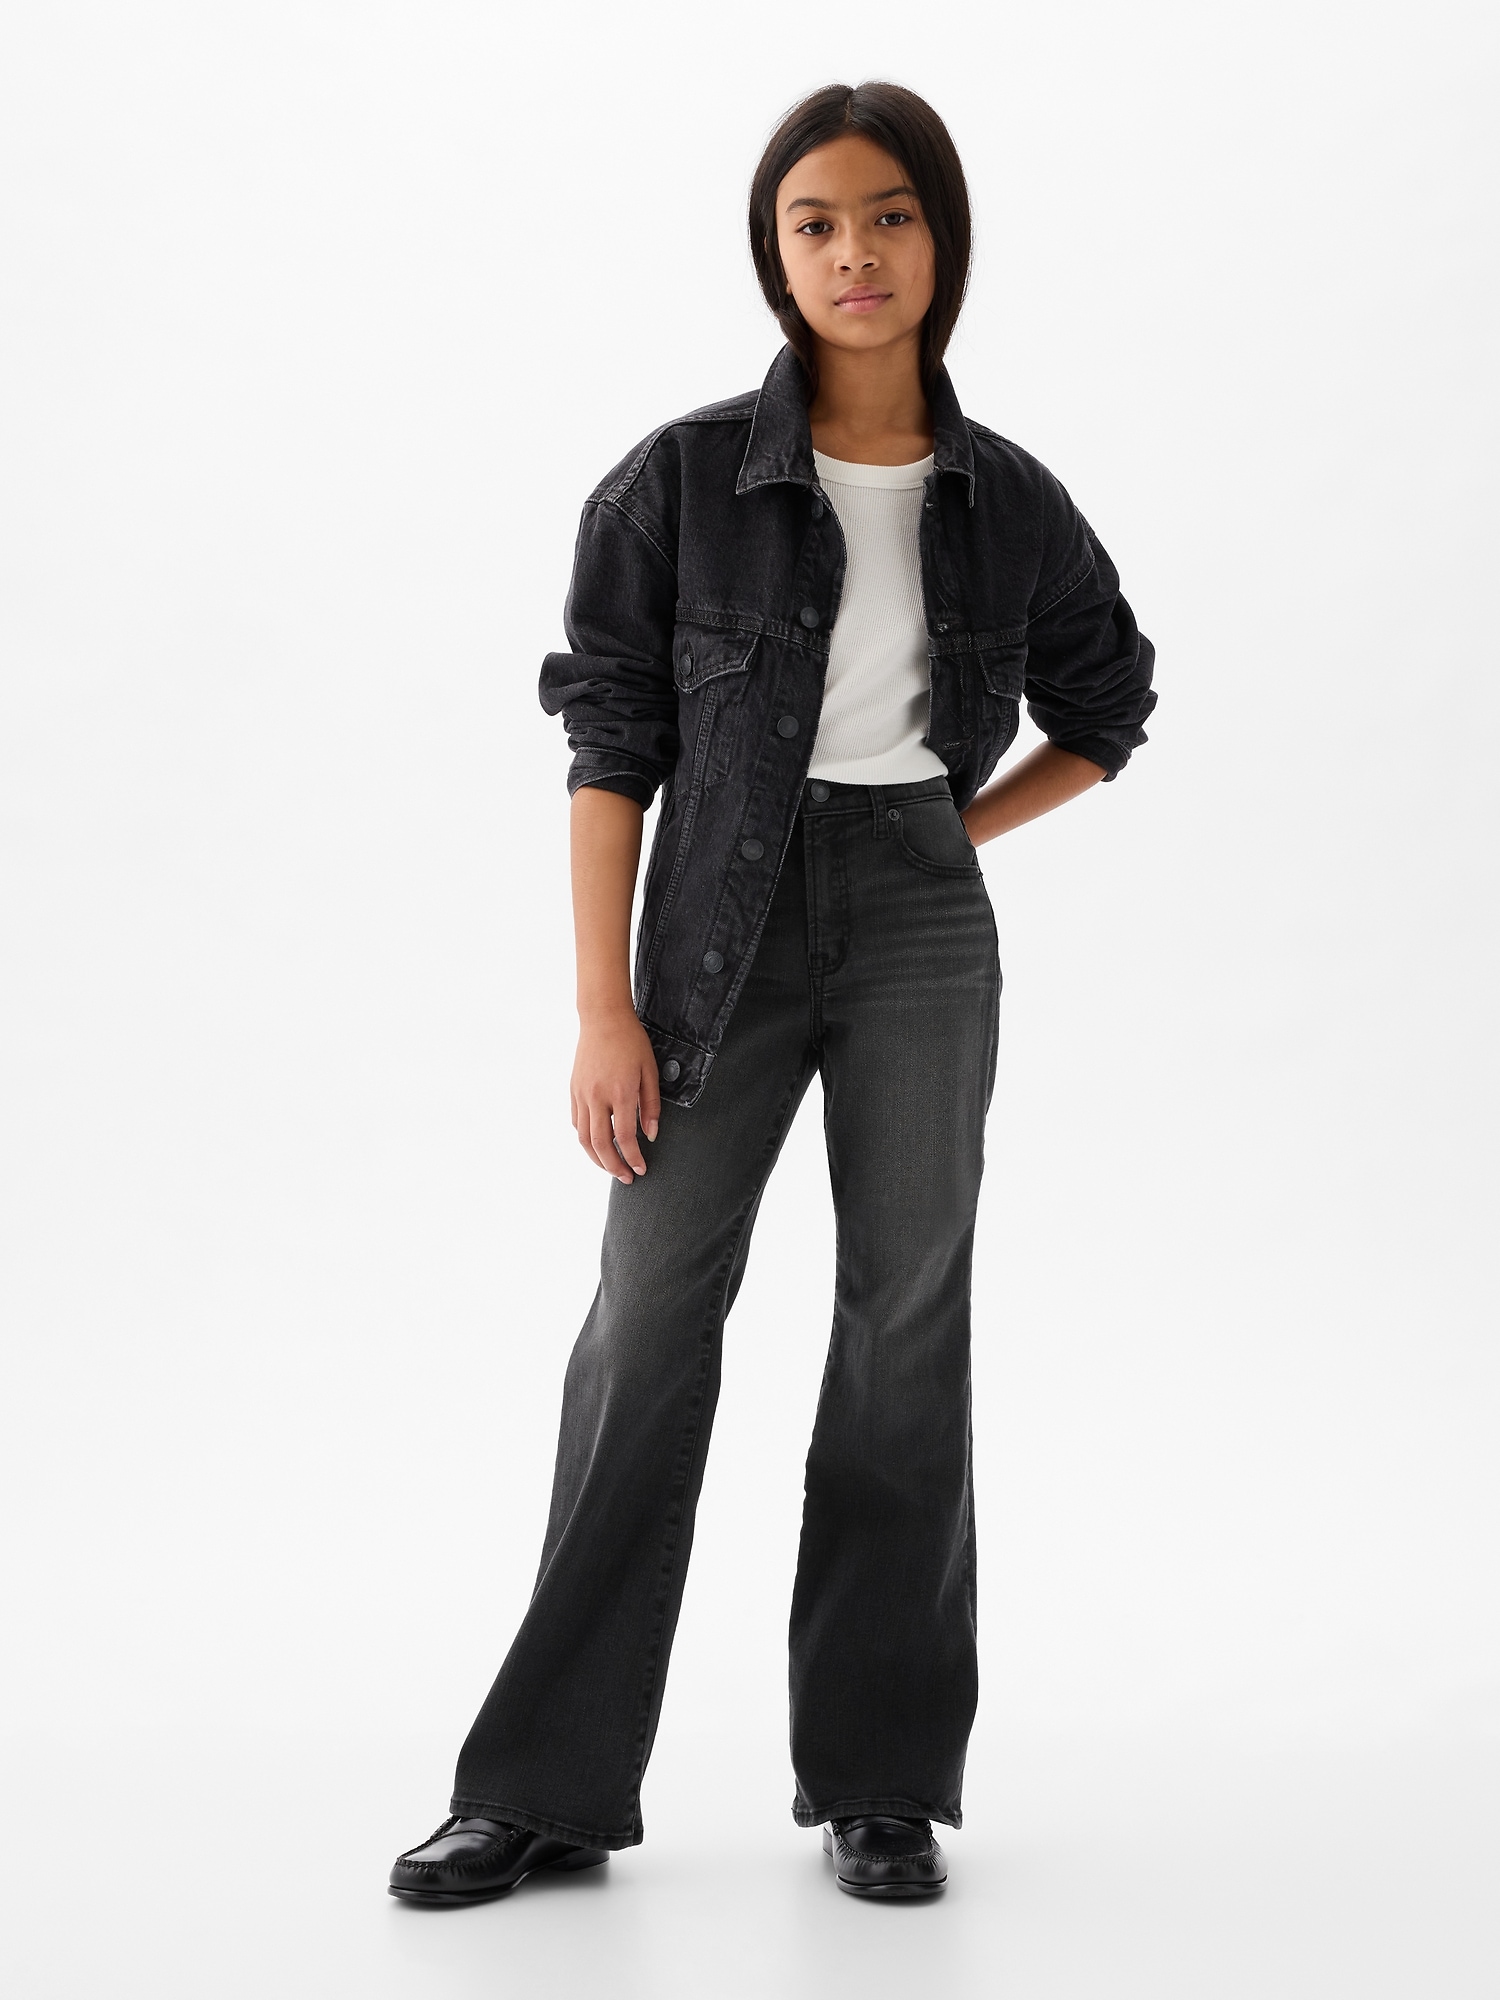 Buy Gap Mid Rise Velour Flare Joggers from the Gap online shop